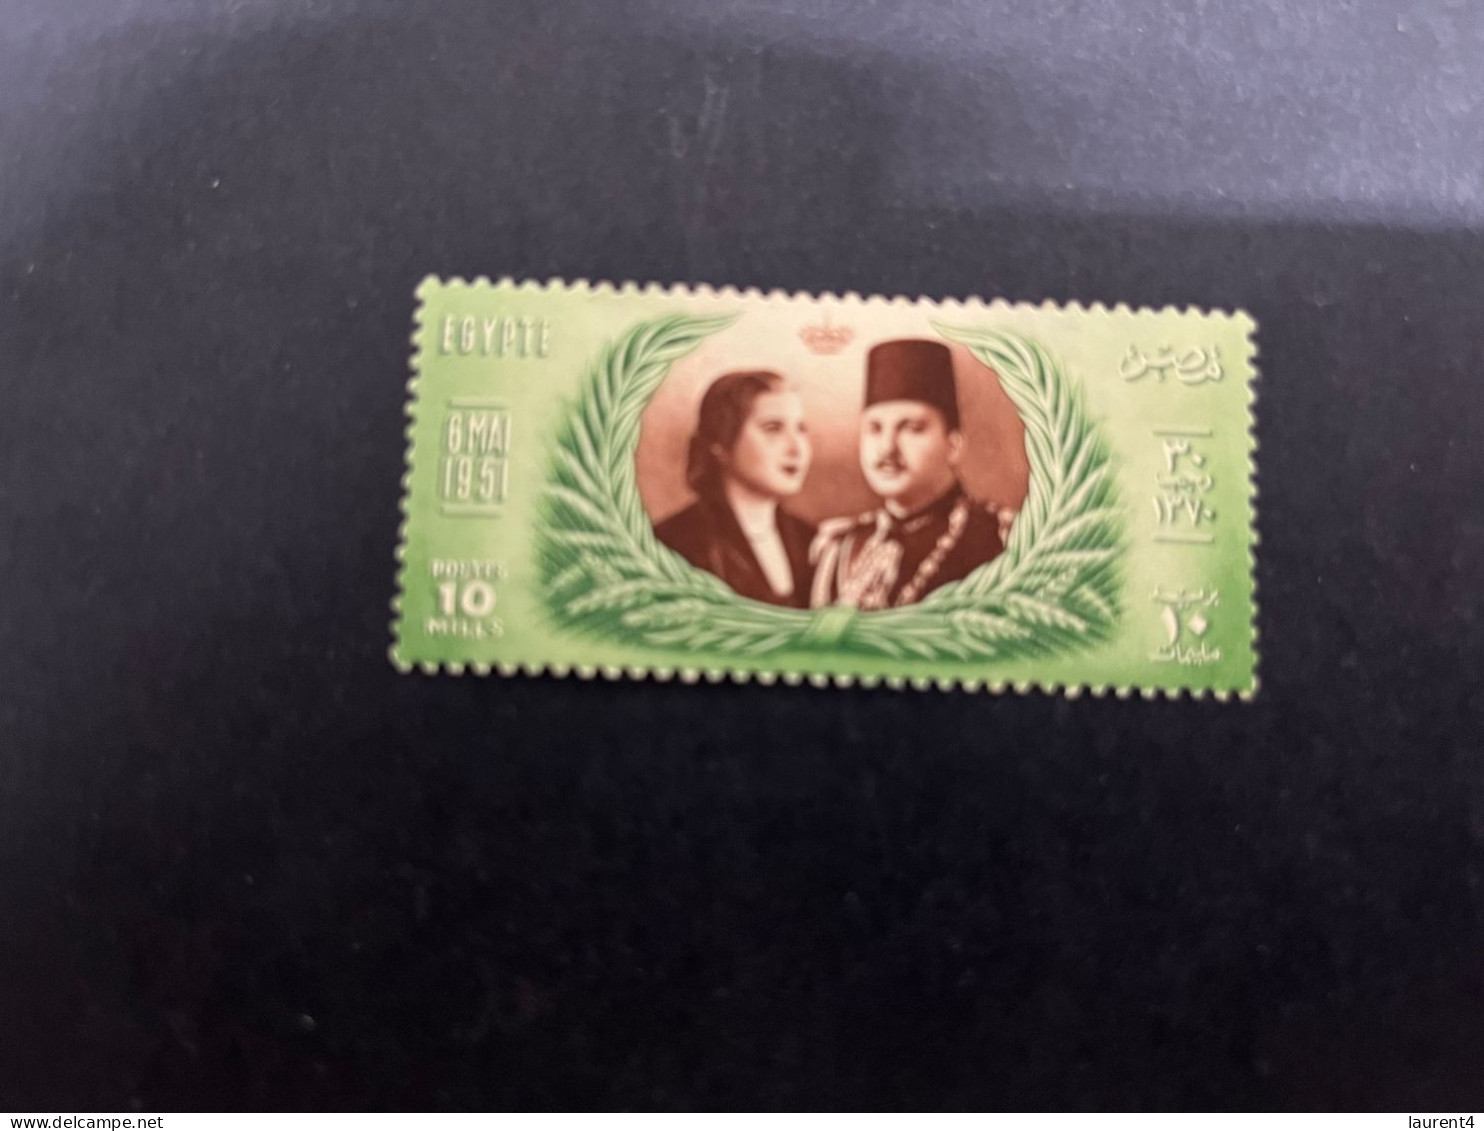 8-1-2024 (stamp) 1 Mint Stamp From Egypt (6 May 1951) - Neufs